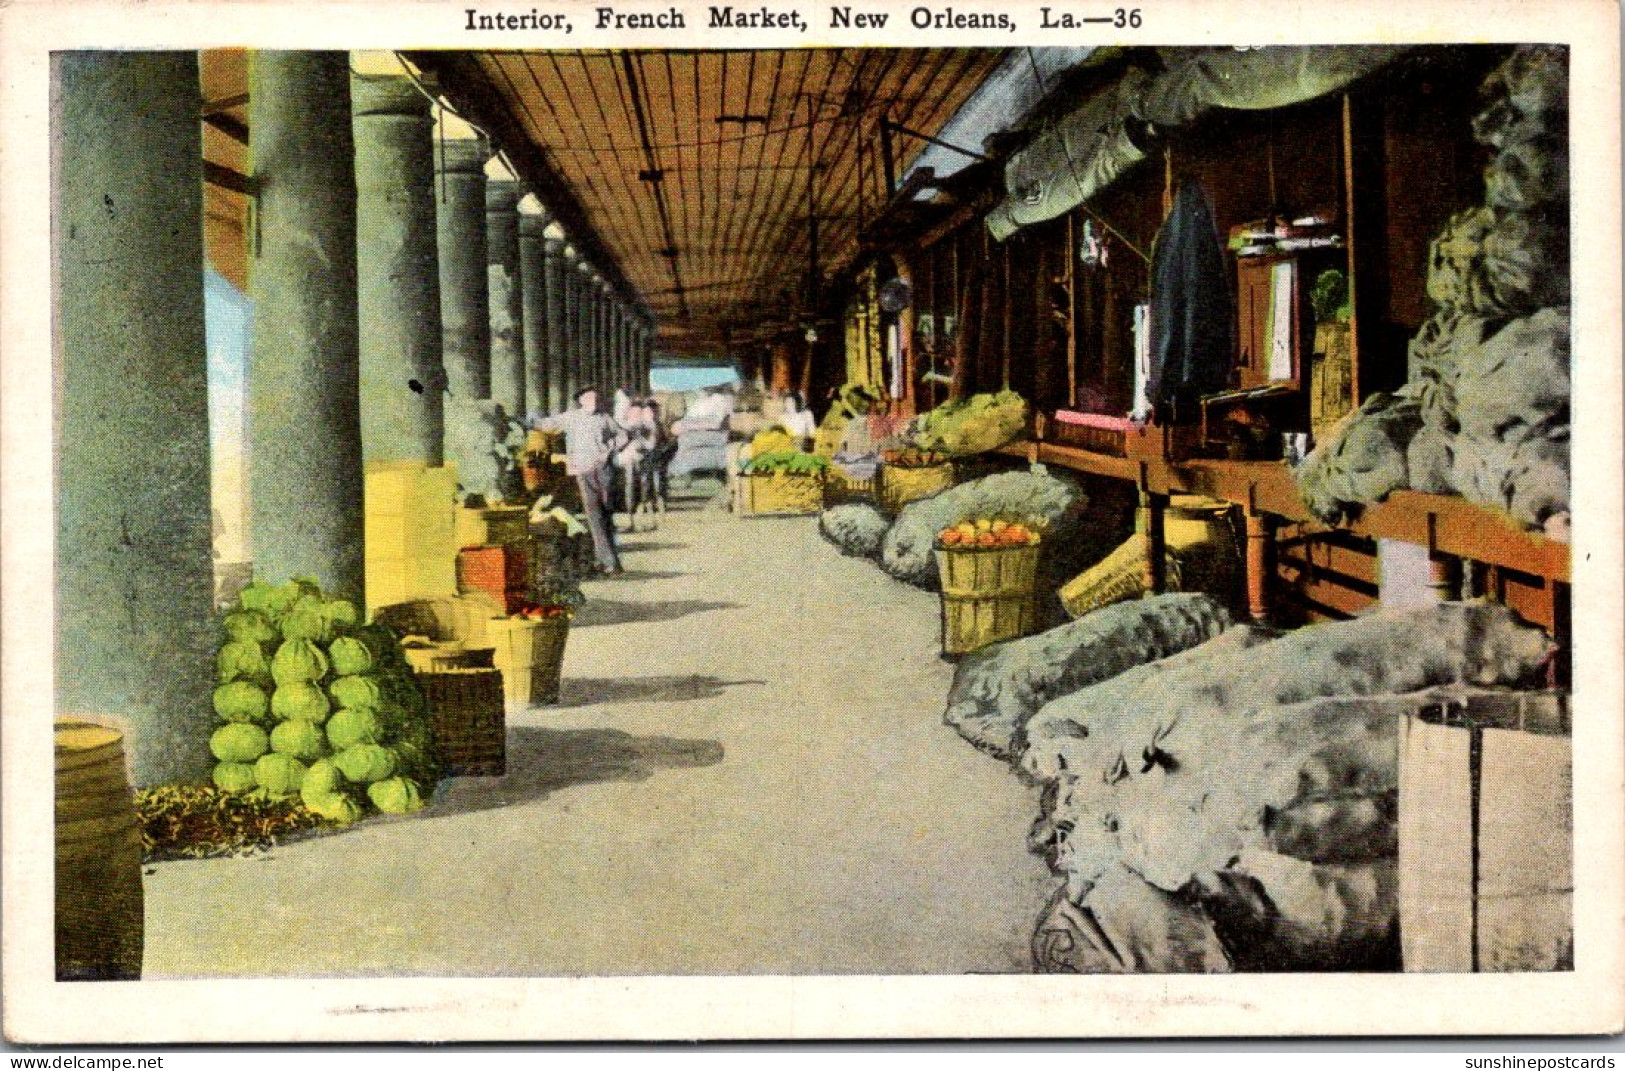 Louisiana New Orleans The French Market Interior Scene - New Orleans